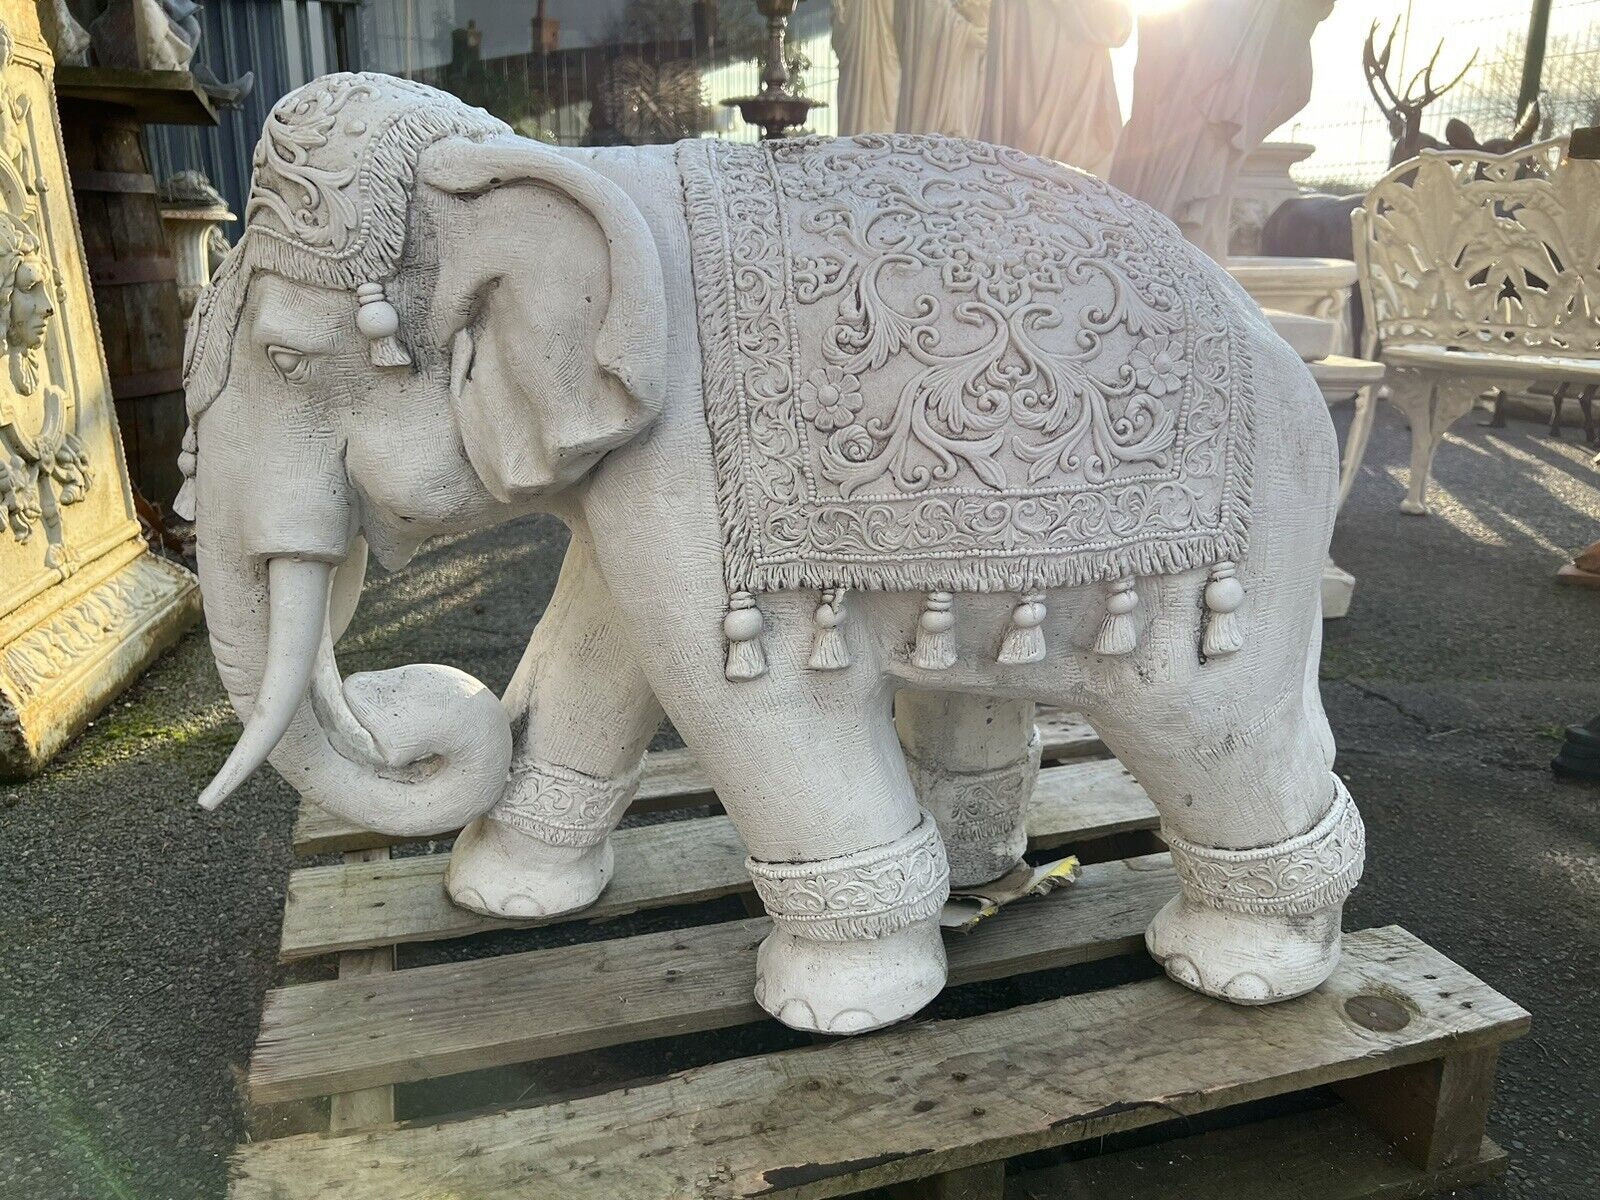 Goodeco 11 ''Elephant Statue for Garden Decor with Gift Appeal - Ideal Gifts  for Women, Mom or Birthday, Beautifully Crafted Outdoor & Home Decor Made  Easy to Wow Your Guests (Elephant) 